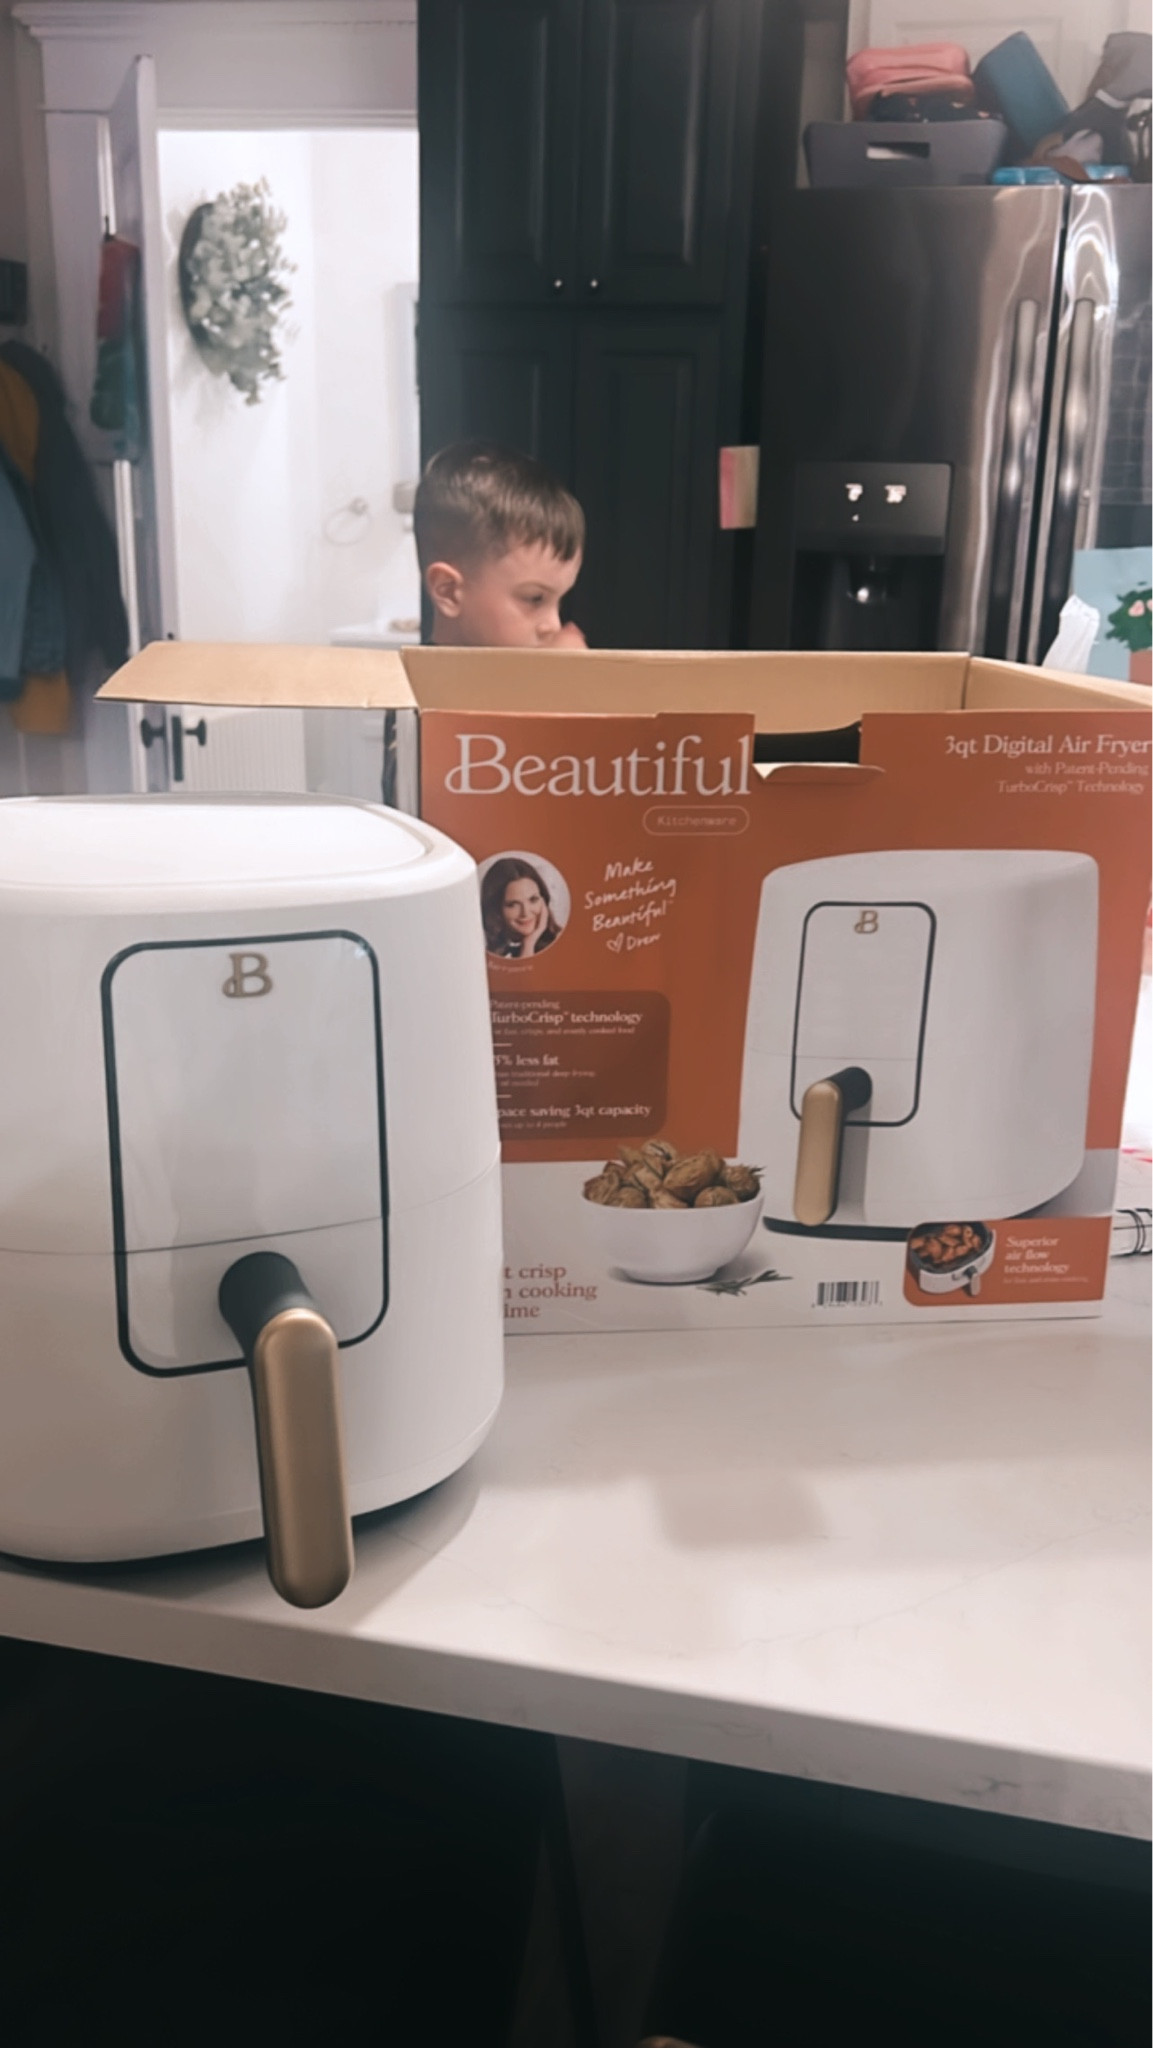 Beautiful 3 Qt Air Fryer with TurboCrisp Technology, White Icing by Drew  Barrymore 